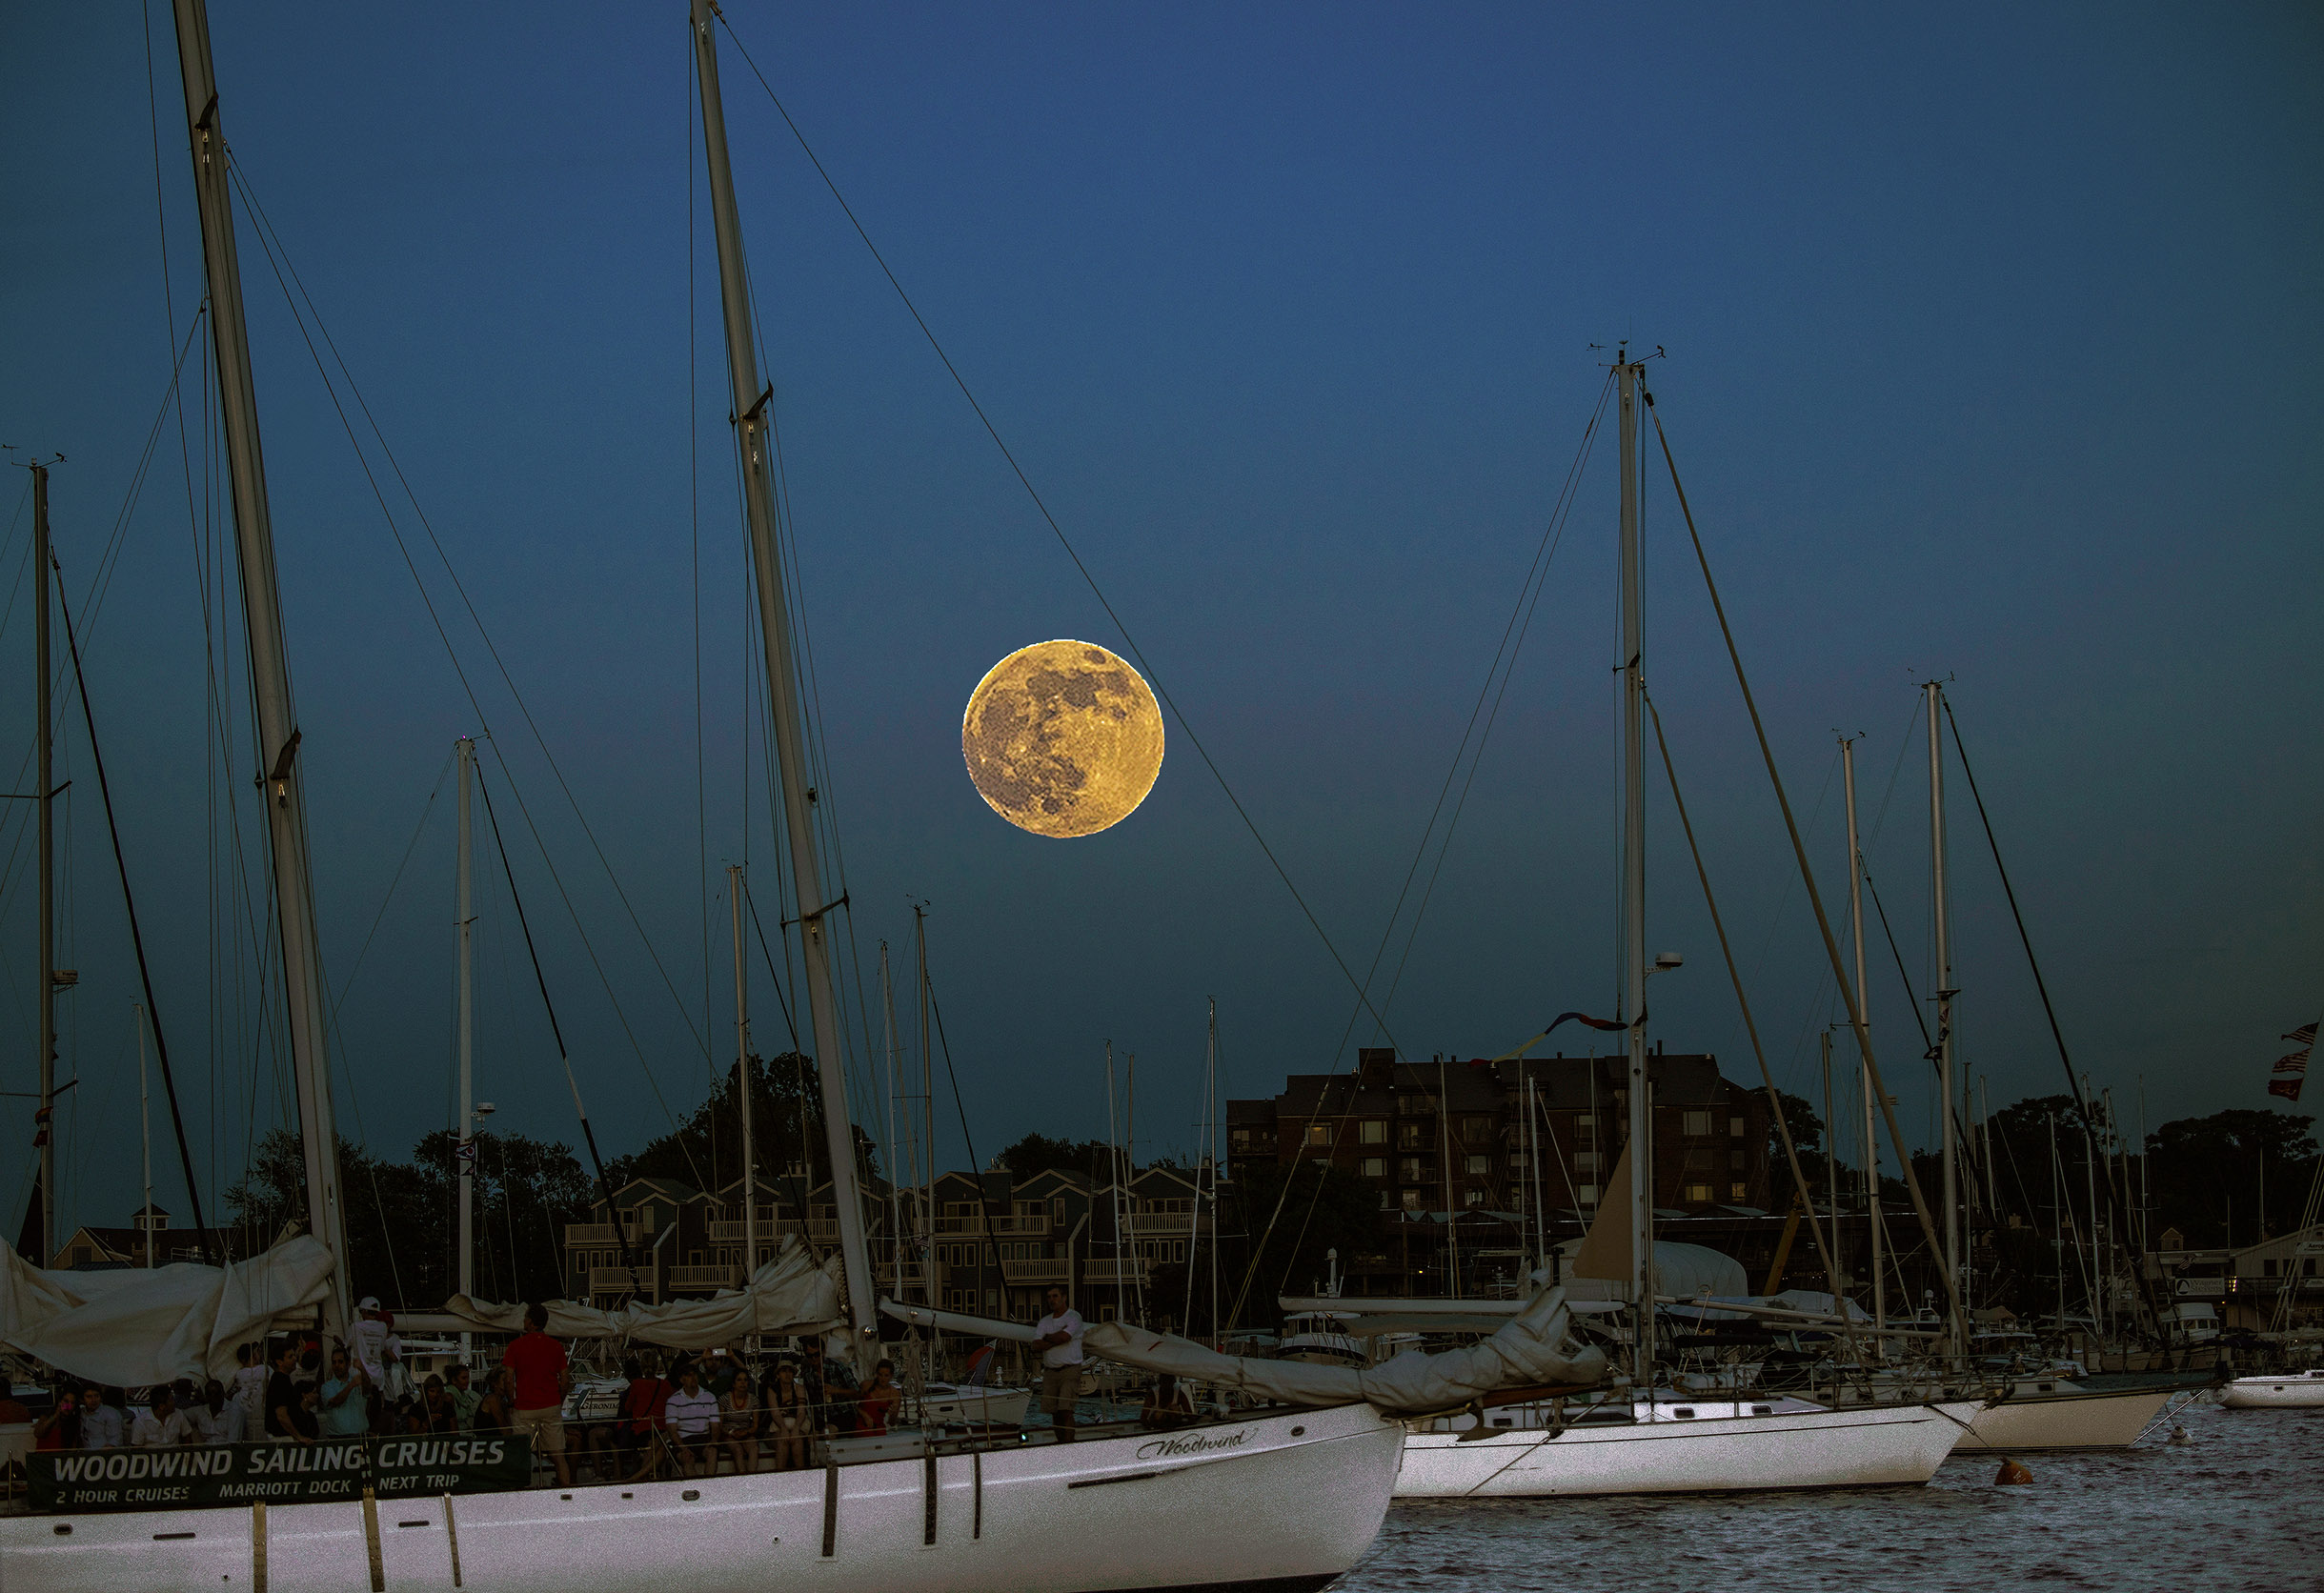 Huge ful moon over the moored sailboats in harbor